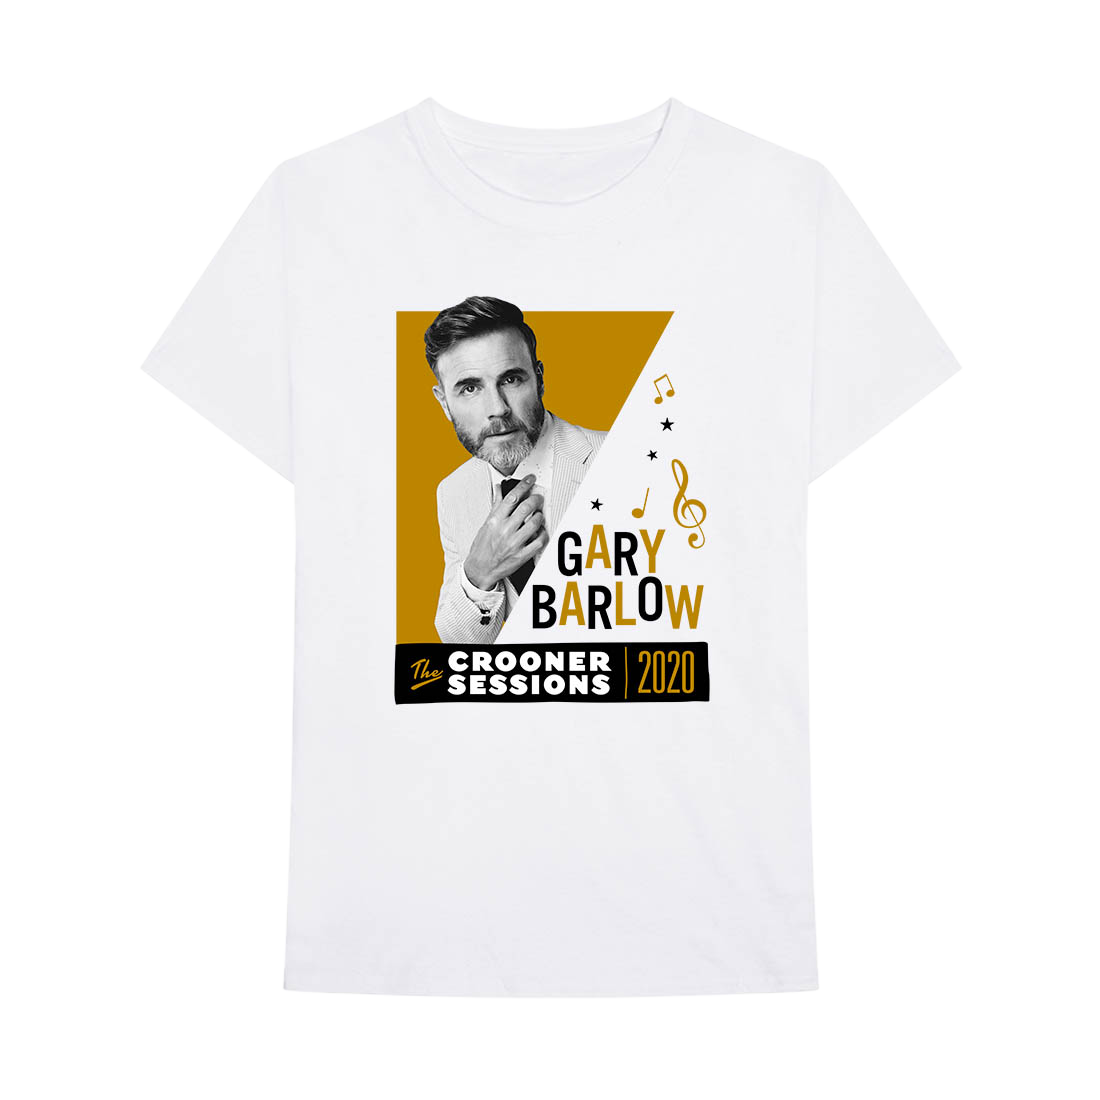 Gary Barlow - The Crooner Sessions Tee